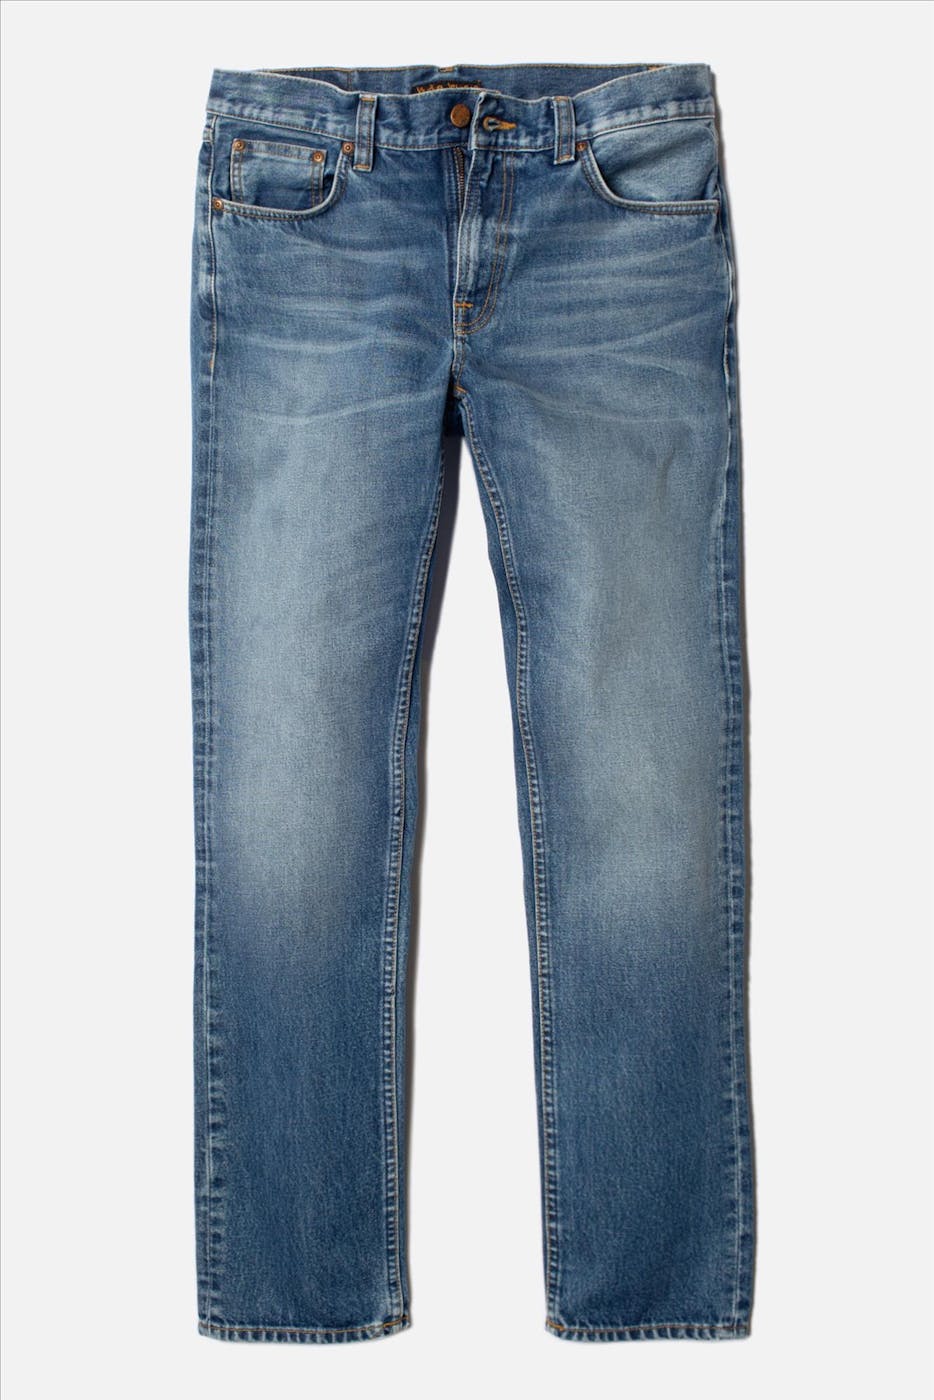 Nudie Jeans Co. - Blauwe Gritty Jackson jeans